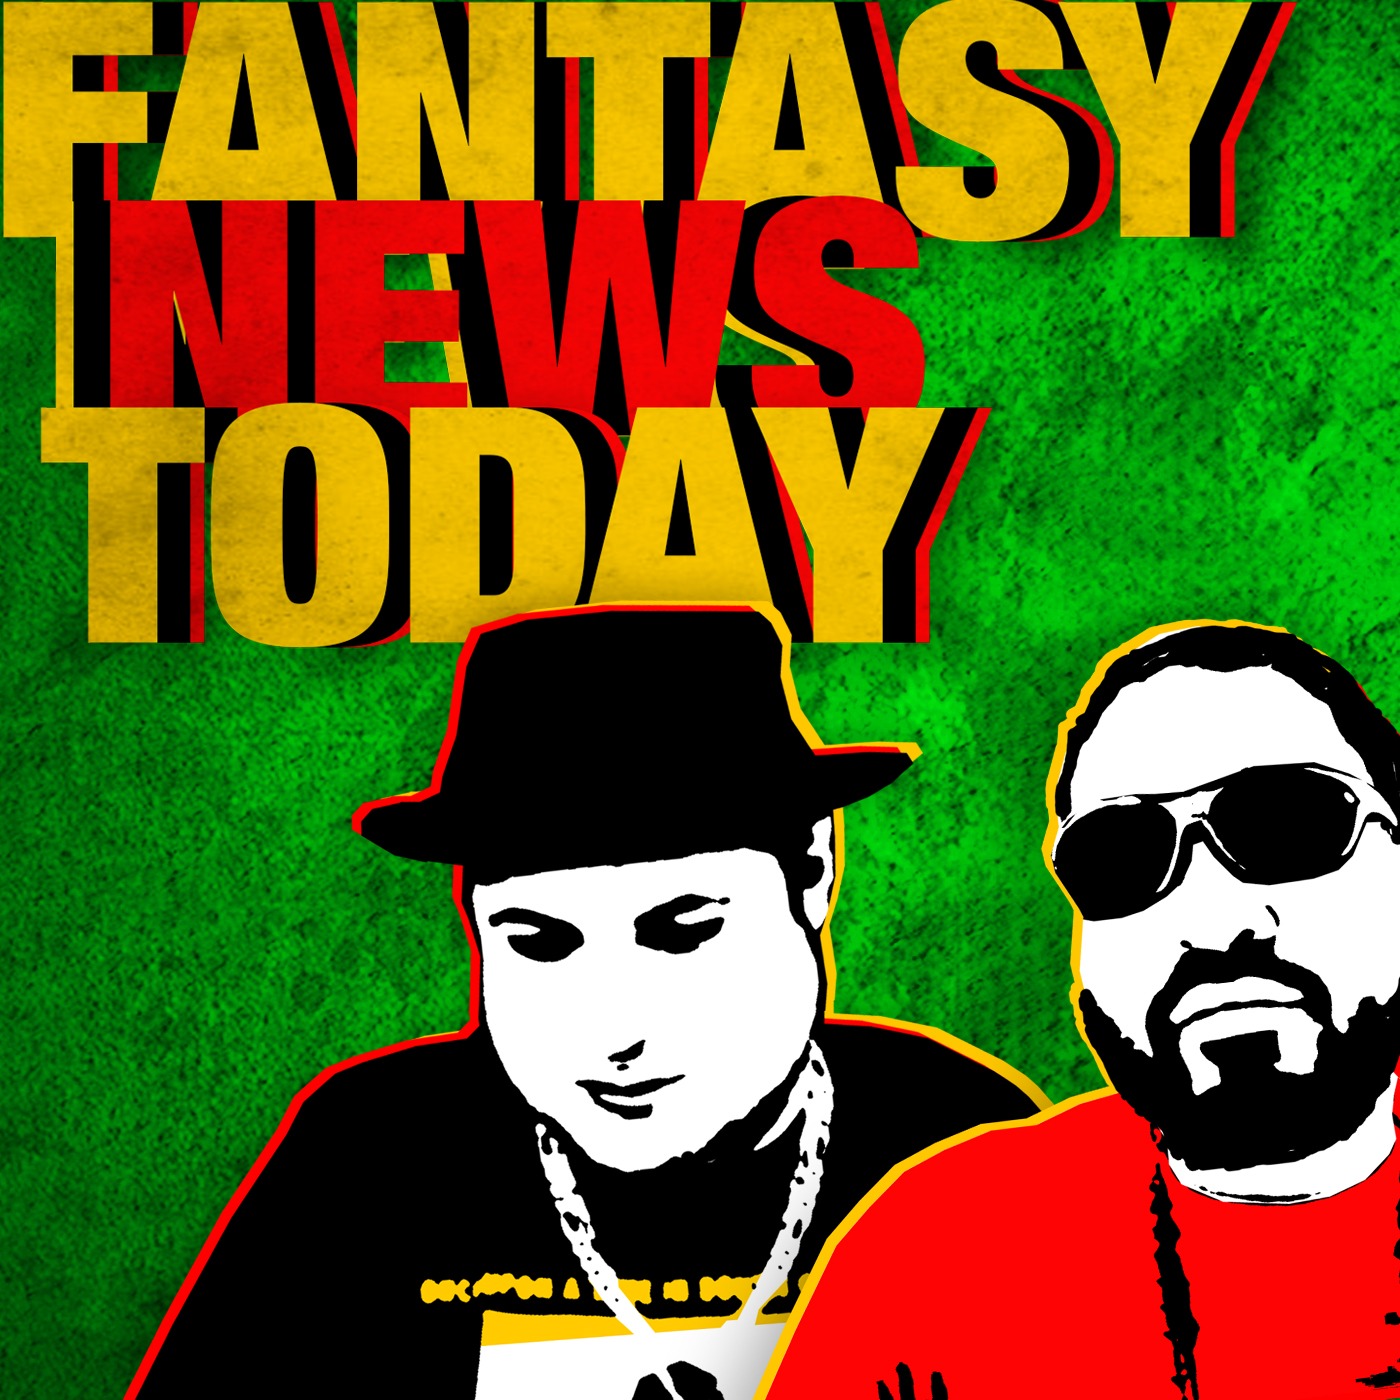 Fantasy Football News Today LIVE, Wednesday April 27th Image